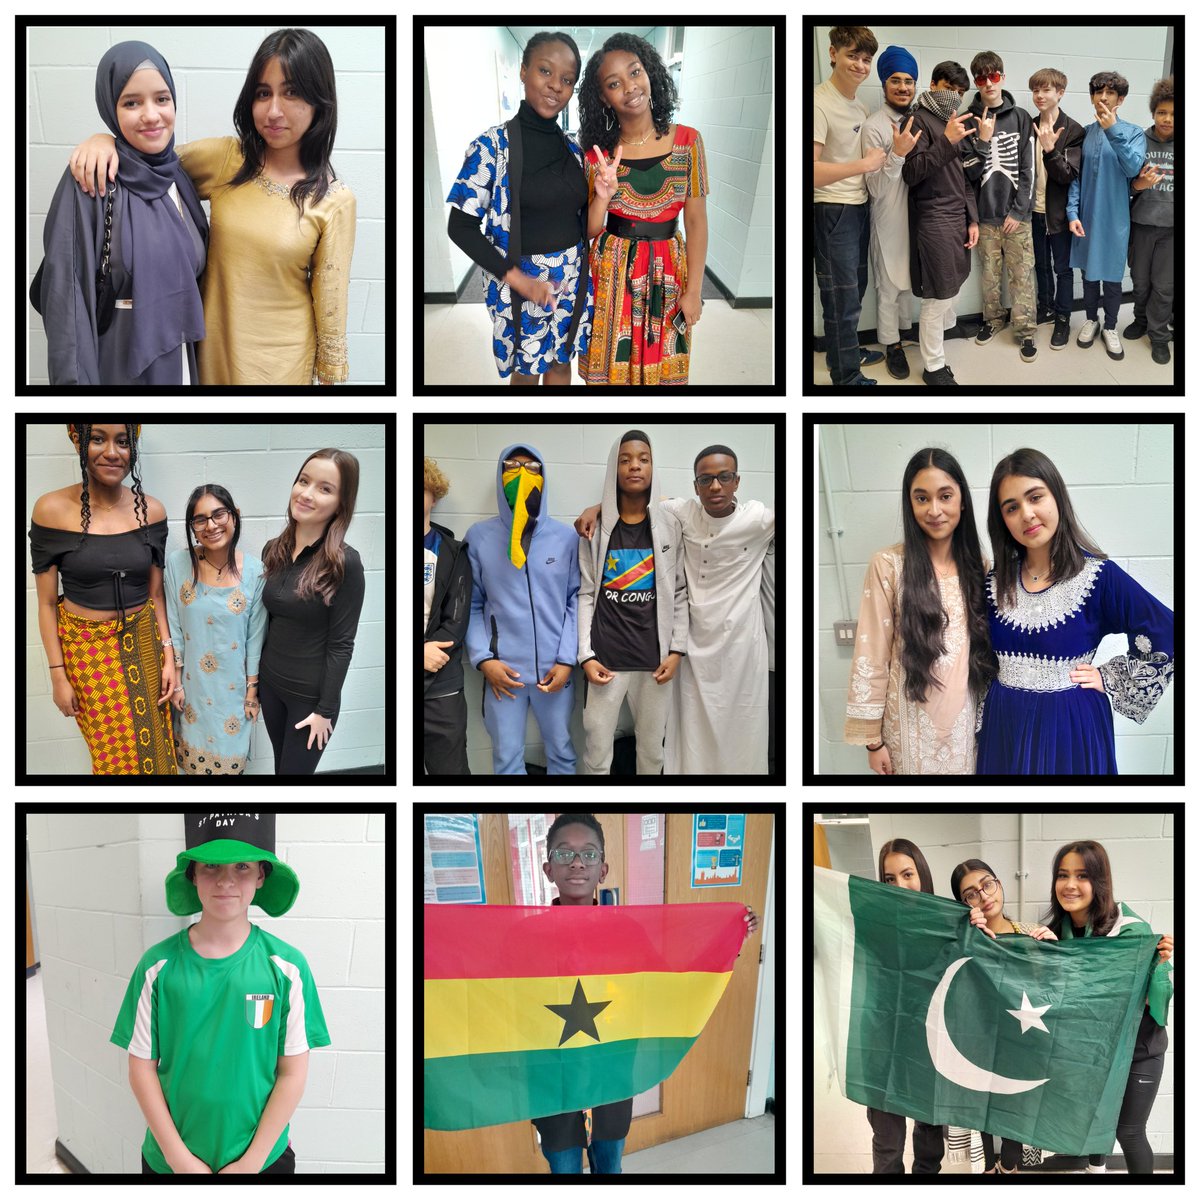 What an end to our cultural diversity week! Our cultural diversity day with fashion show and celebrations all round! #teamparrenthorn #proud #community #celebrateandeducate